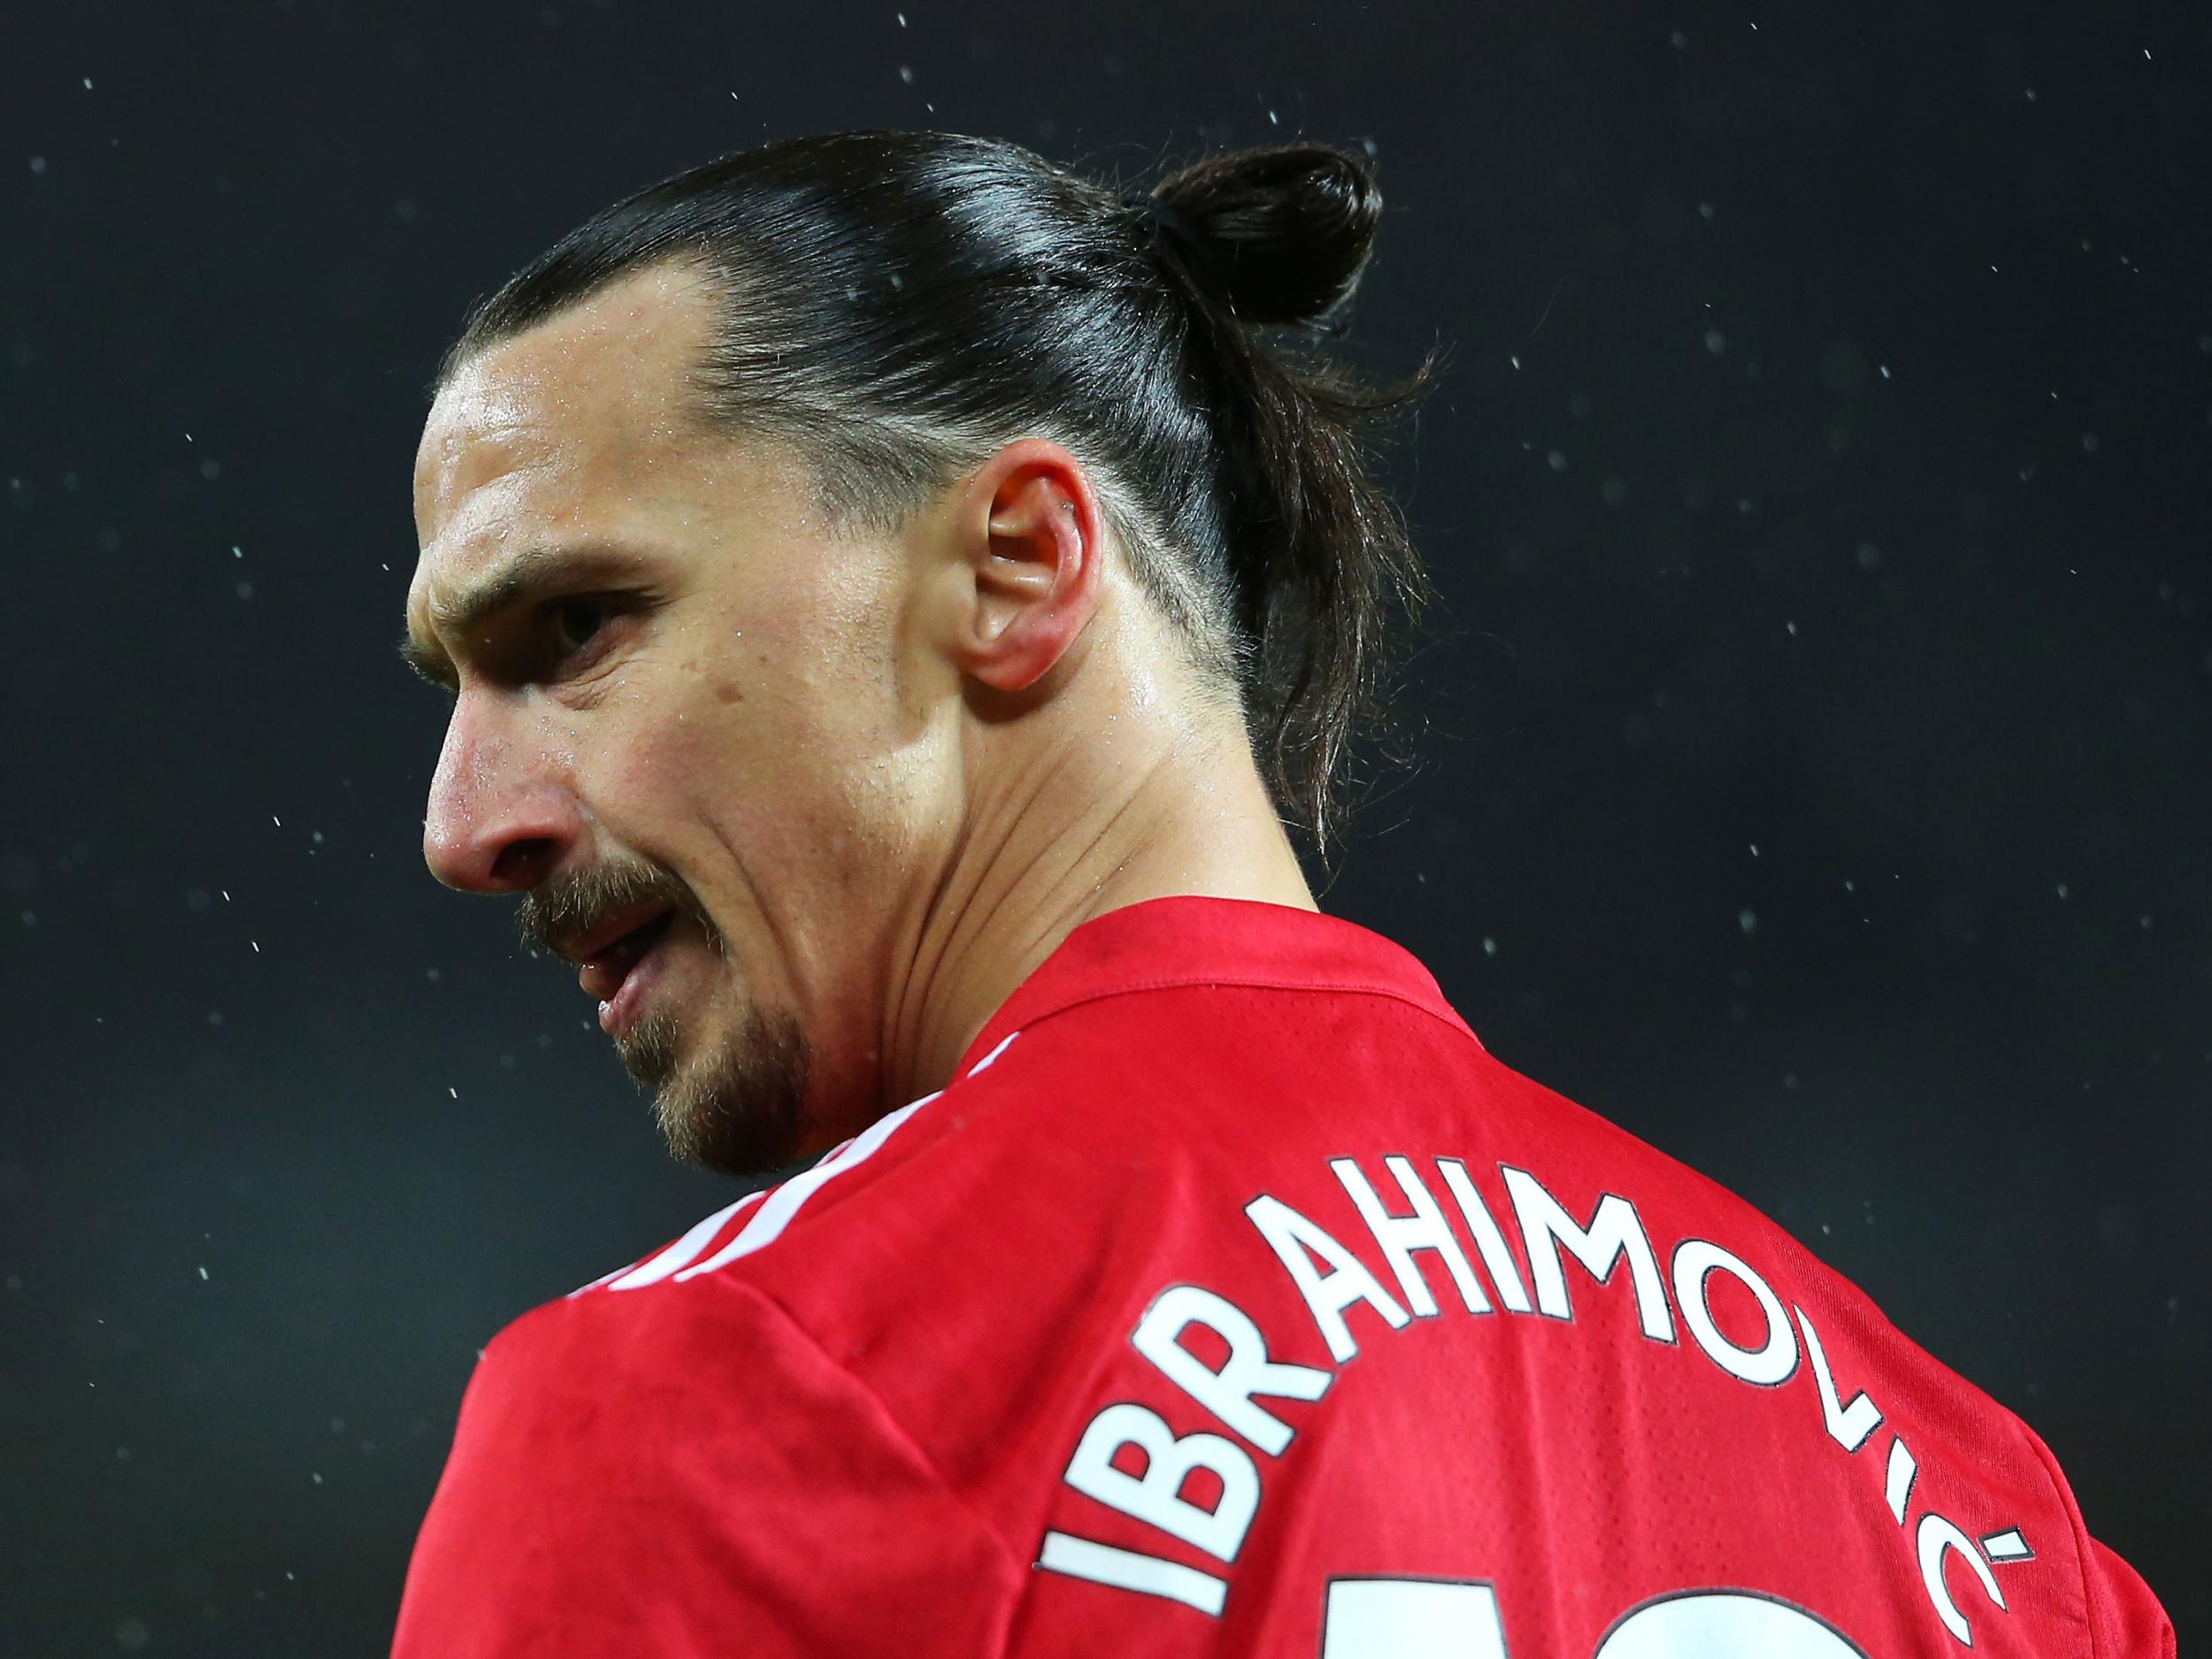 Zlatan Ibrahimovic struggled to fully recover from the effects of a serious knee injury